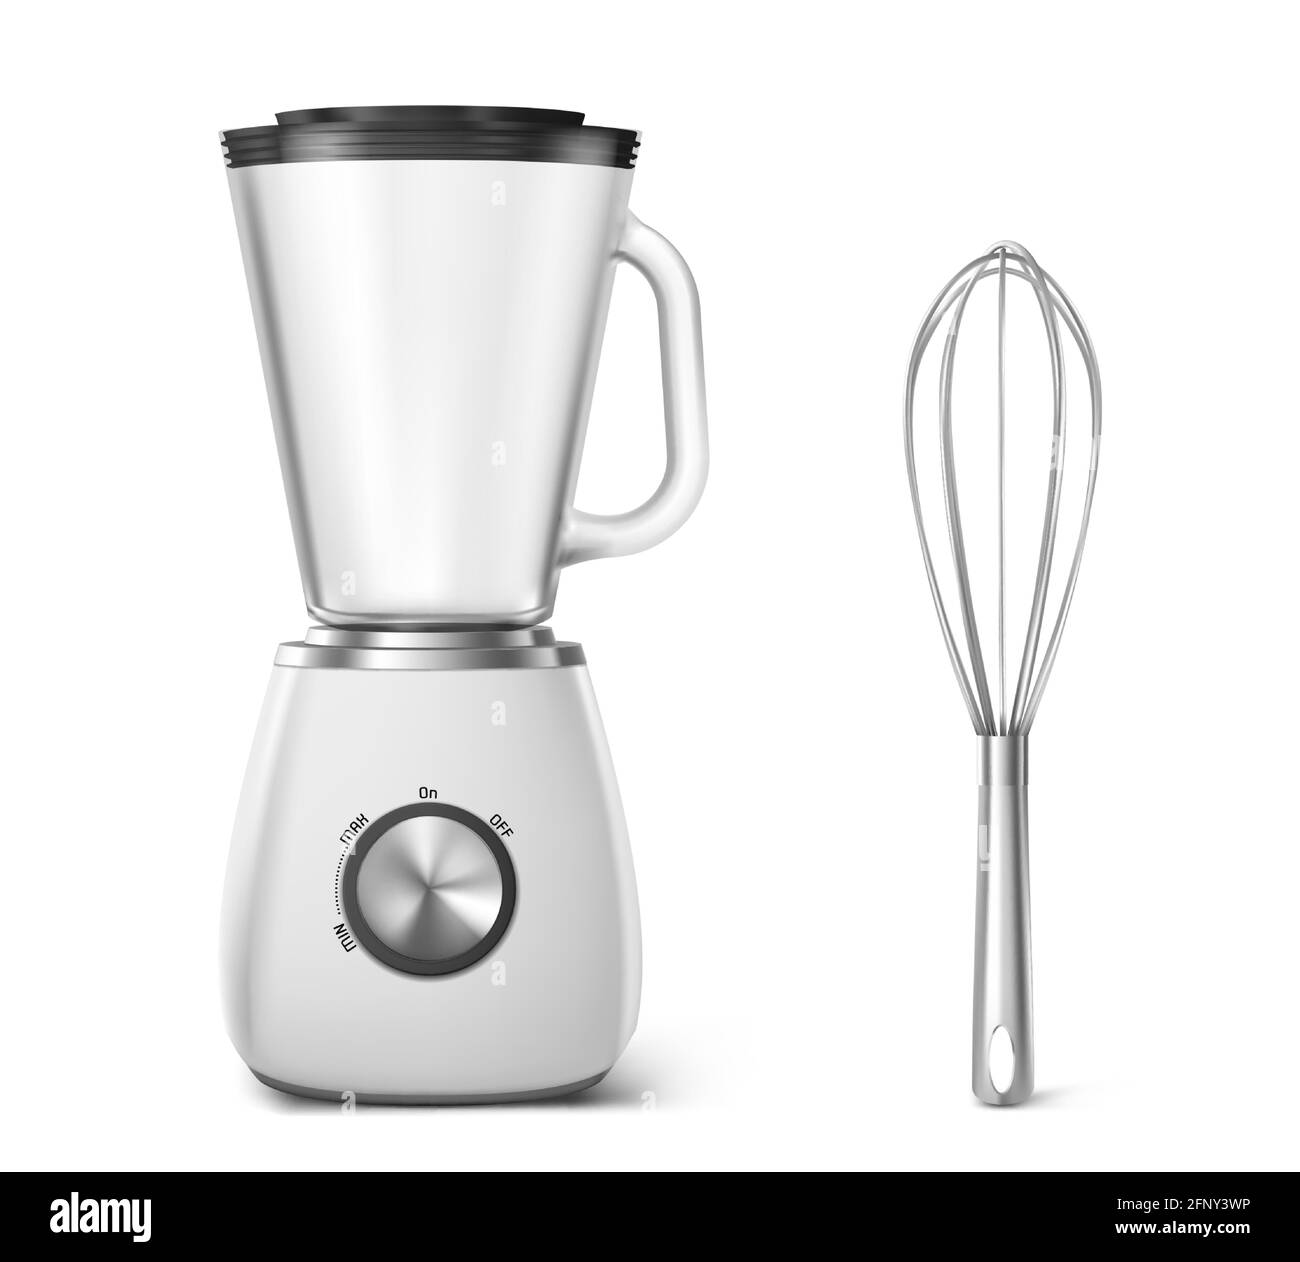 Kitchen appliances electric blender and whisk. Household equipment